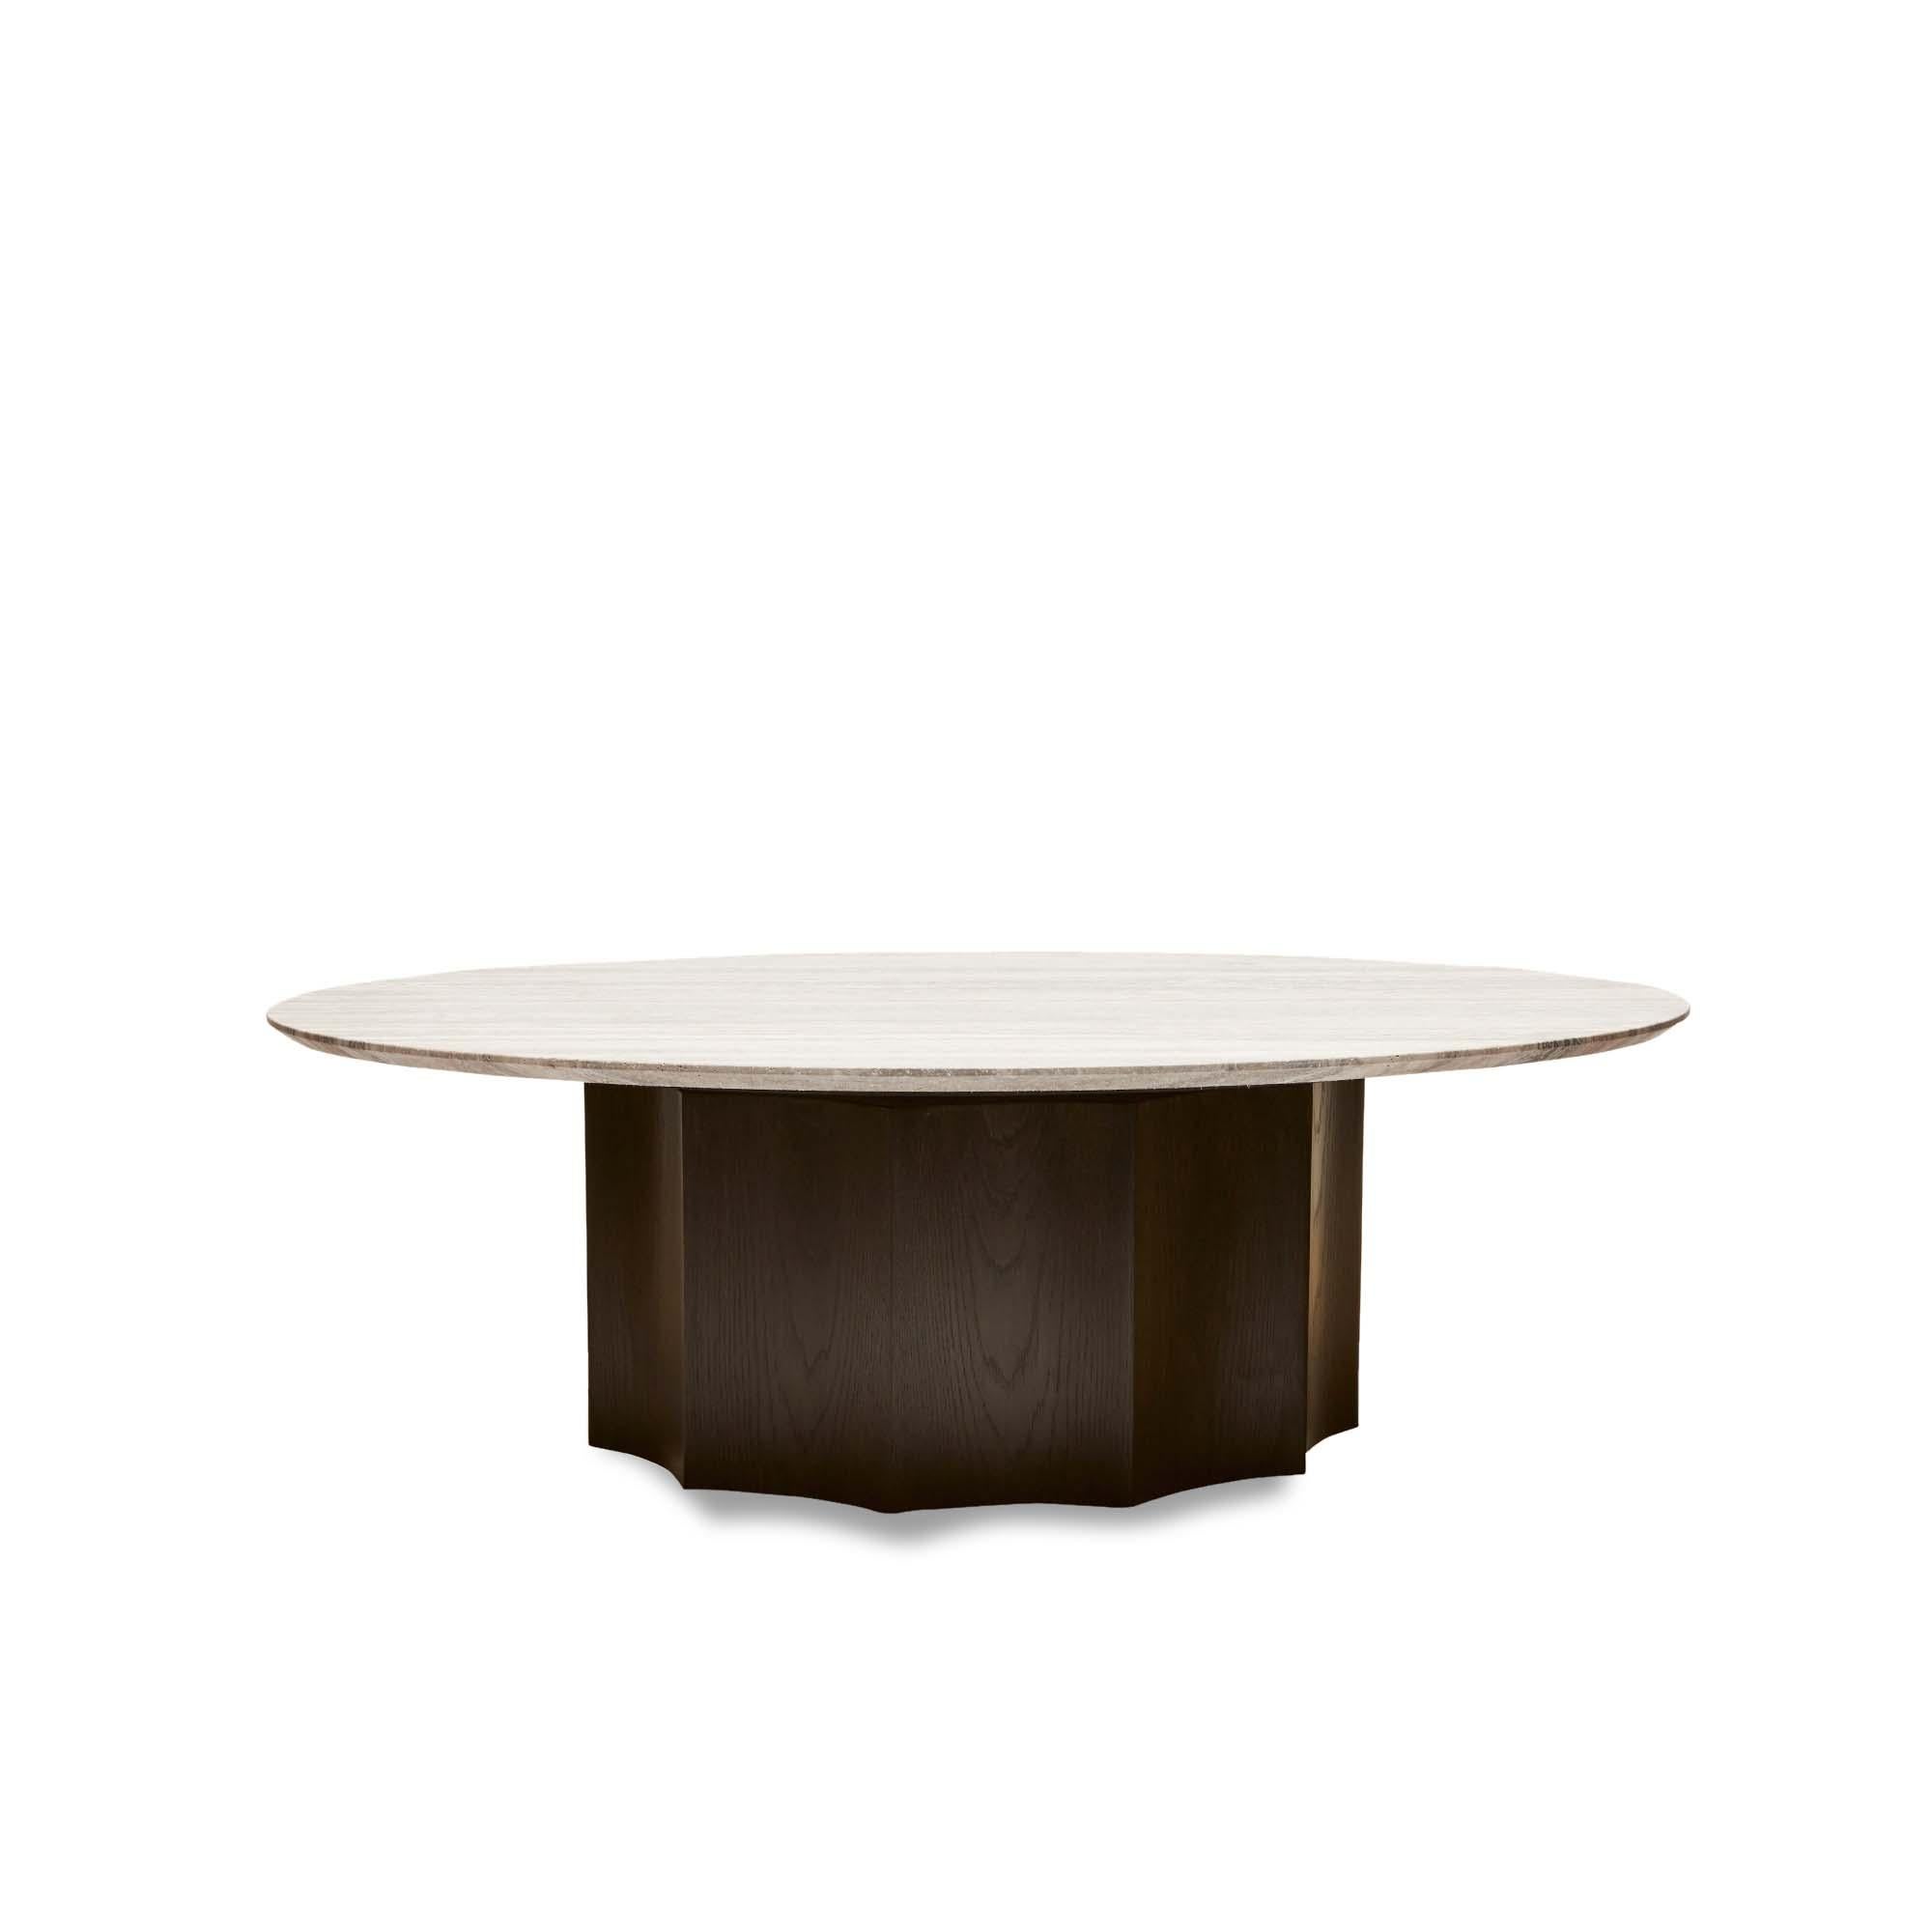 The Normandie cocktail Table features a fluted American walnut or white oak base with a stone top. Available in three sizes.

The Lawson-Fenning Collection is designed and handmade in Los Angeles, California.
 